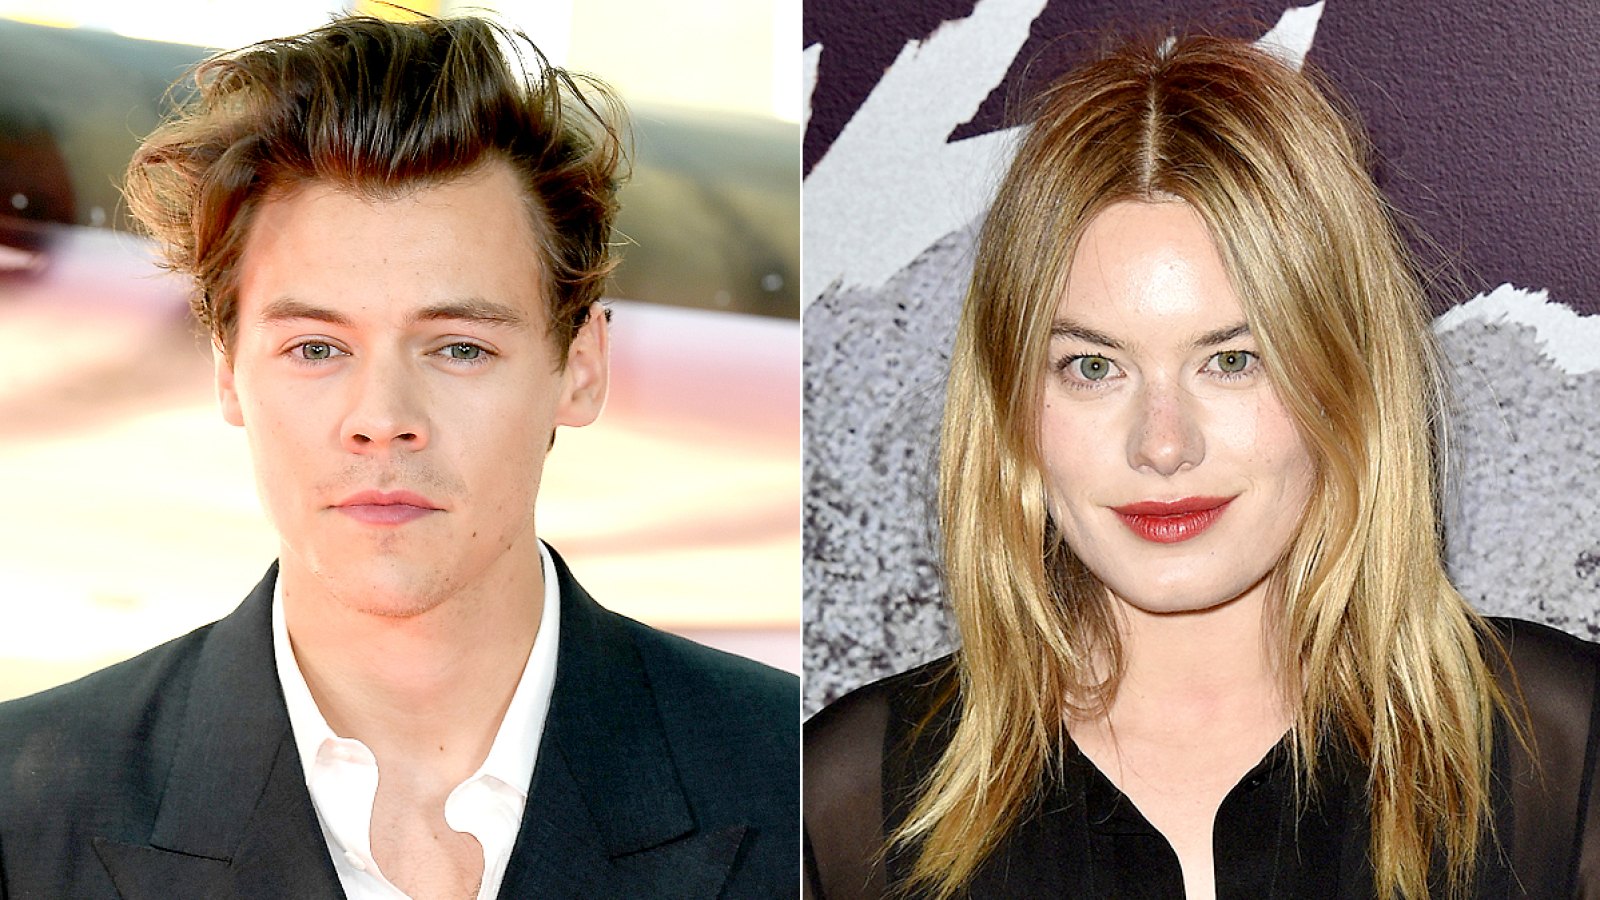 Harry Styles and Camille Rowe